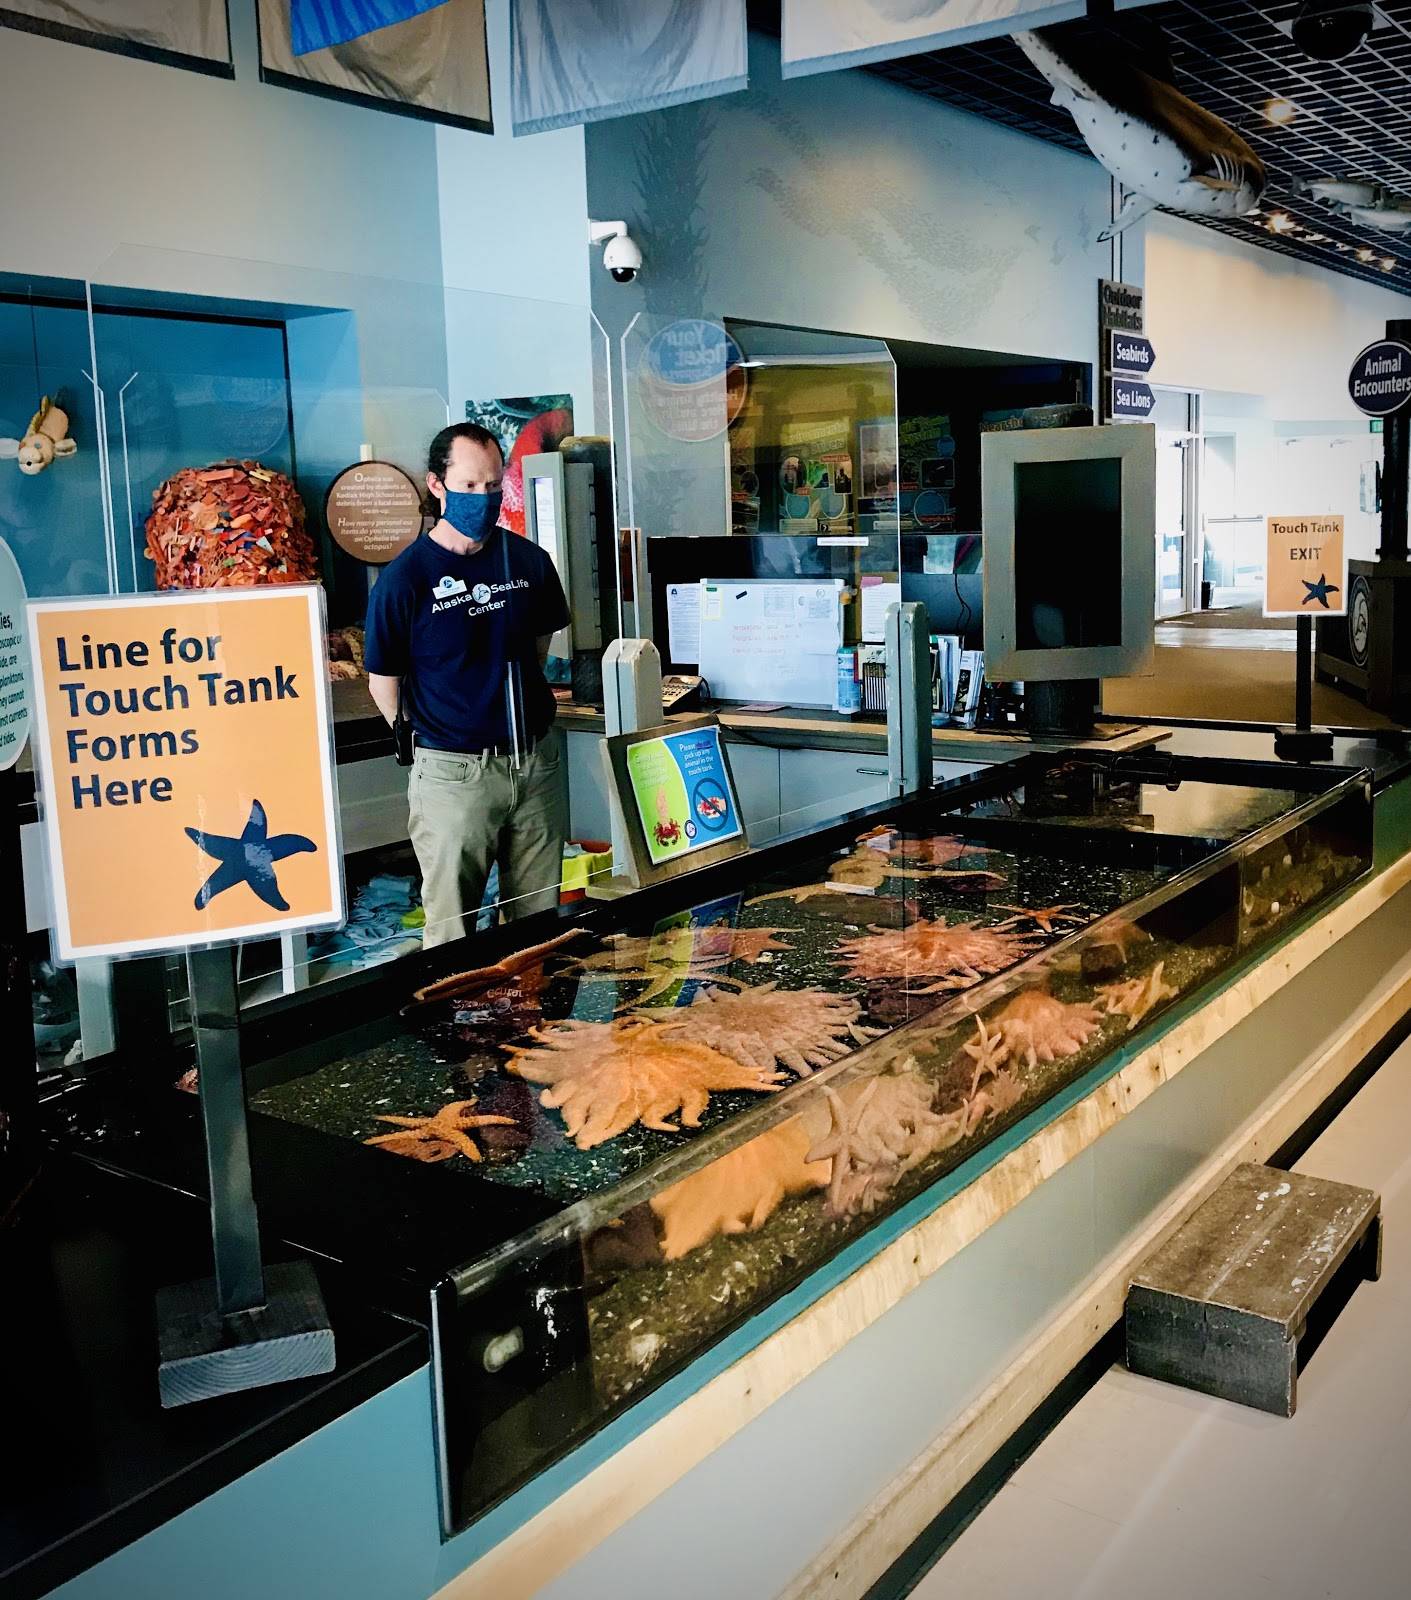 The Alaska SeaLife Center’s touch tank can be seen here in this undated photo in Seward, Alaska, and an ASLC staff member can be seen wearing a mask as part of their current health and safety protocols. (Photo courtesy Alaska SeaLife Center)